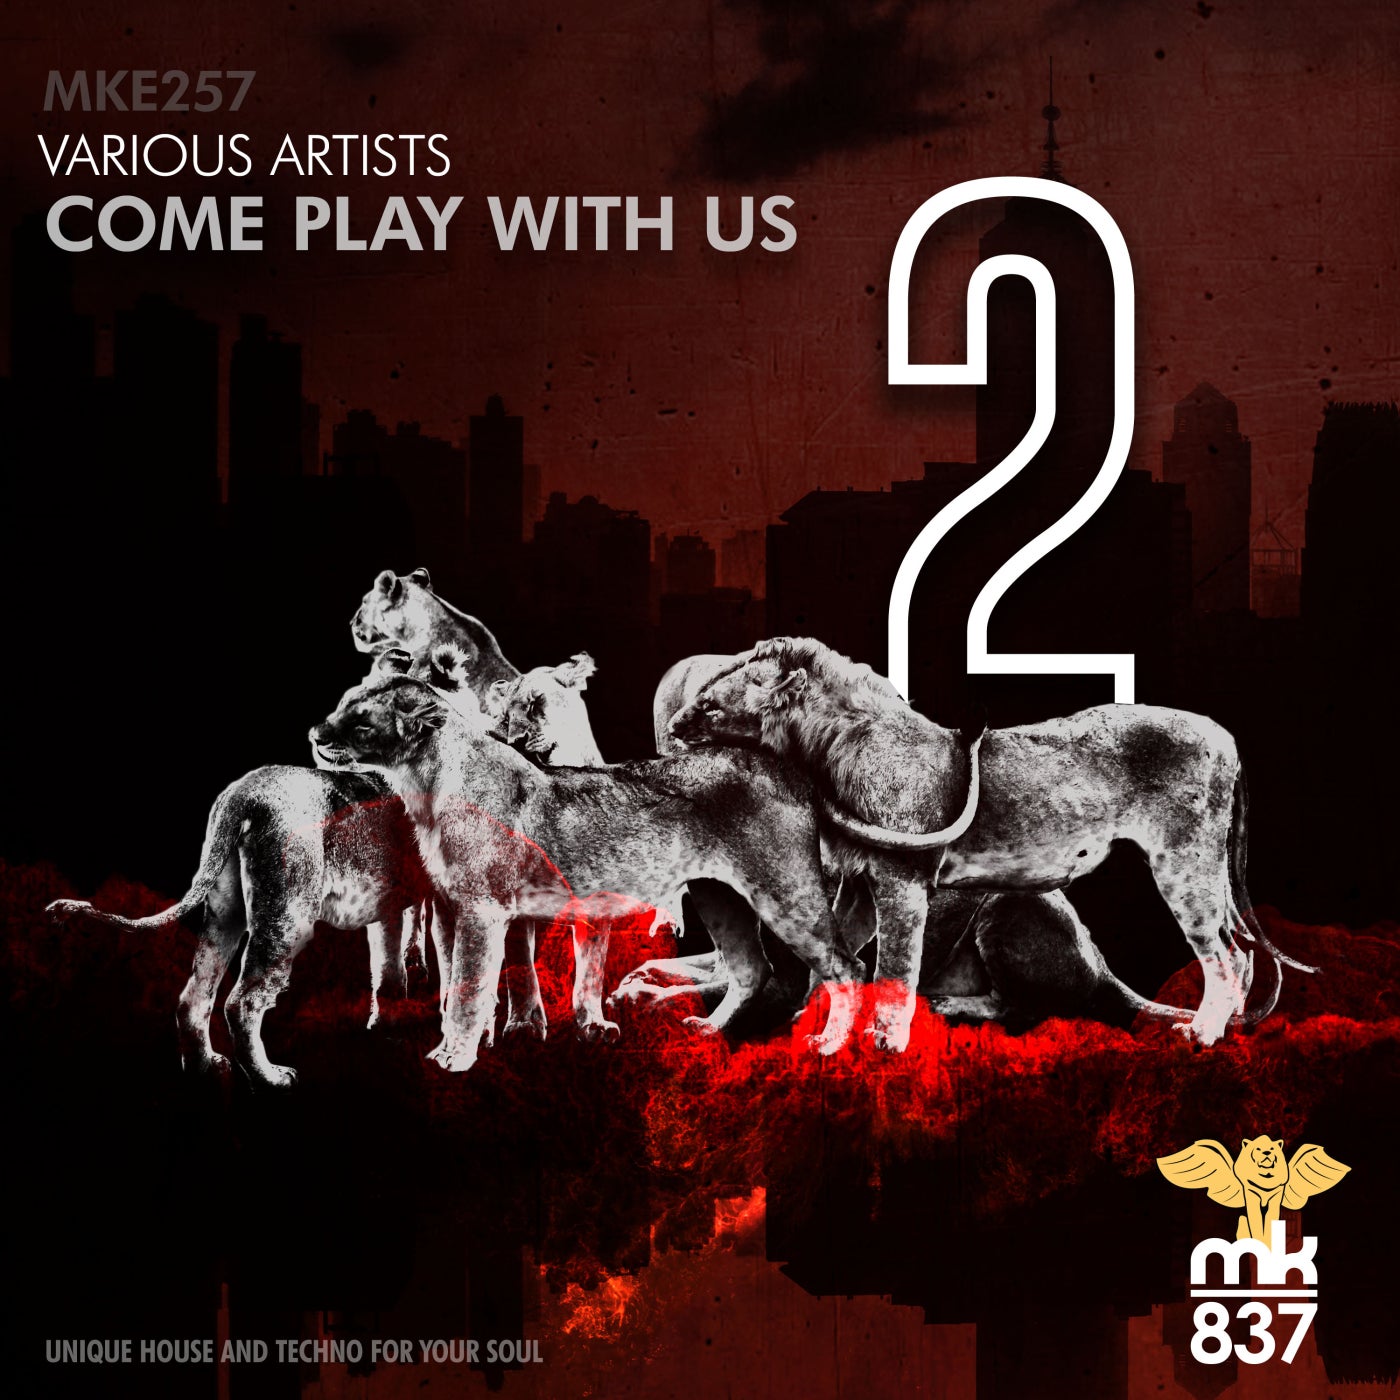 VA – Come Play With Us, Vol. 2 [MKE257]